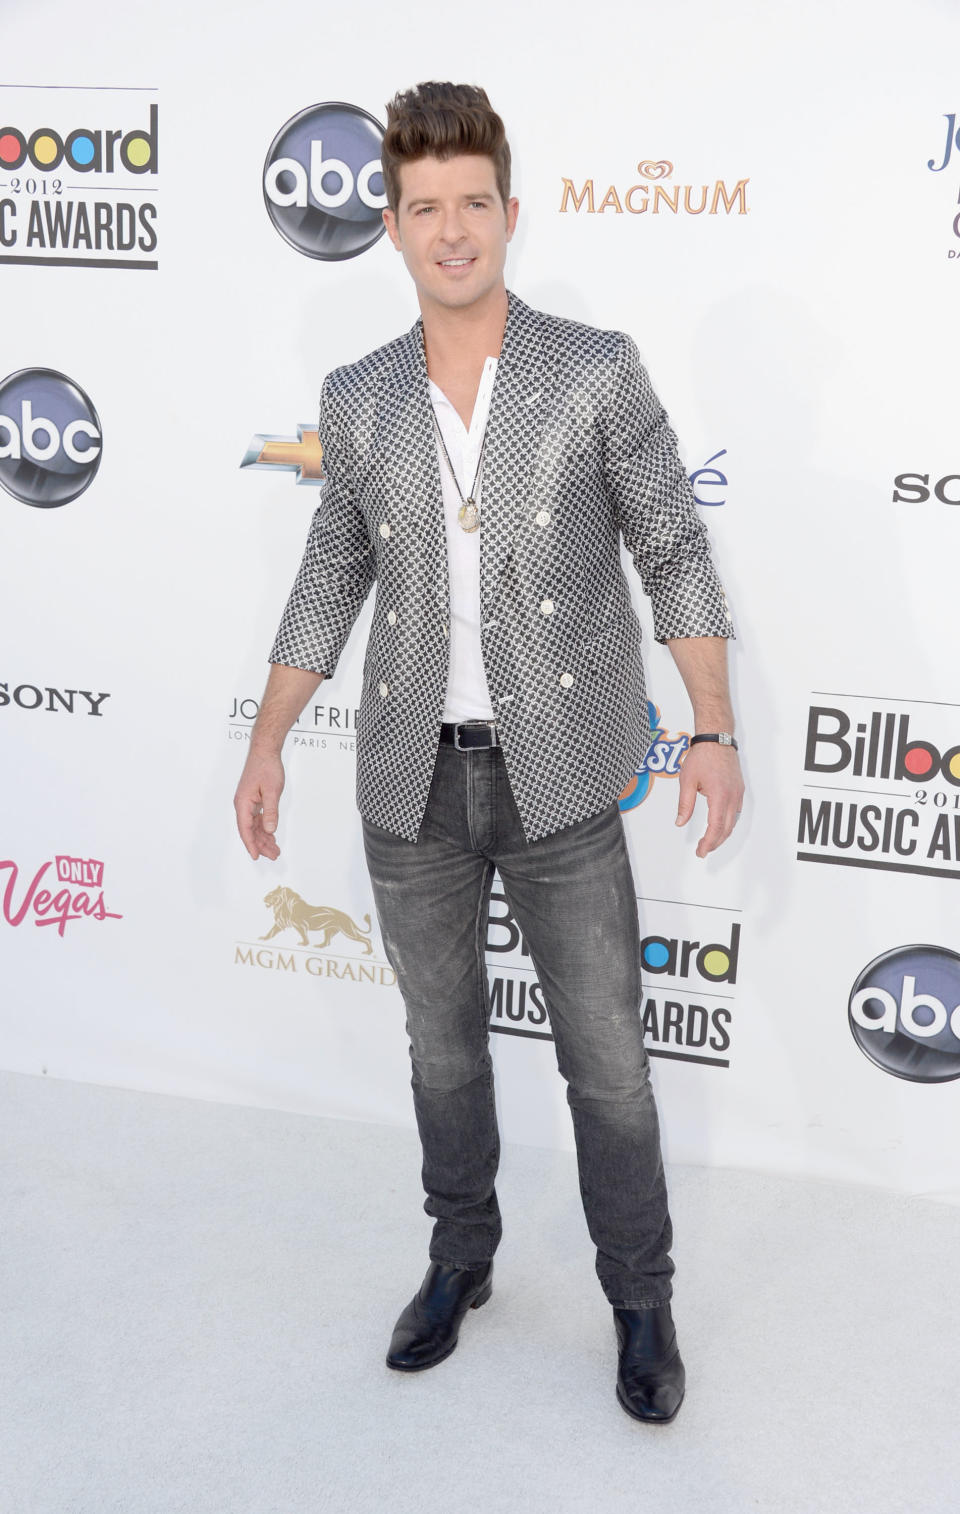 LAS VEGAS, NV - MAY 20: Singer Robin Thicke arrives at the 2012 Billboard Music Awards held at the MGM Grand Garden Arena on May 20, 2012 in Las Vegas, Nevada. (Photo by Frazer Harrison/Getty Images for ABC)